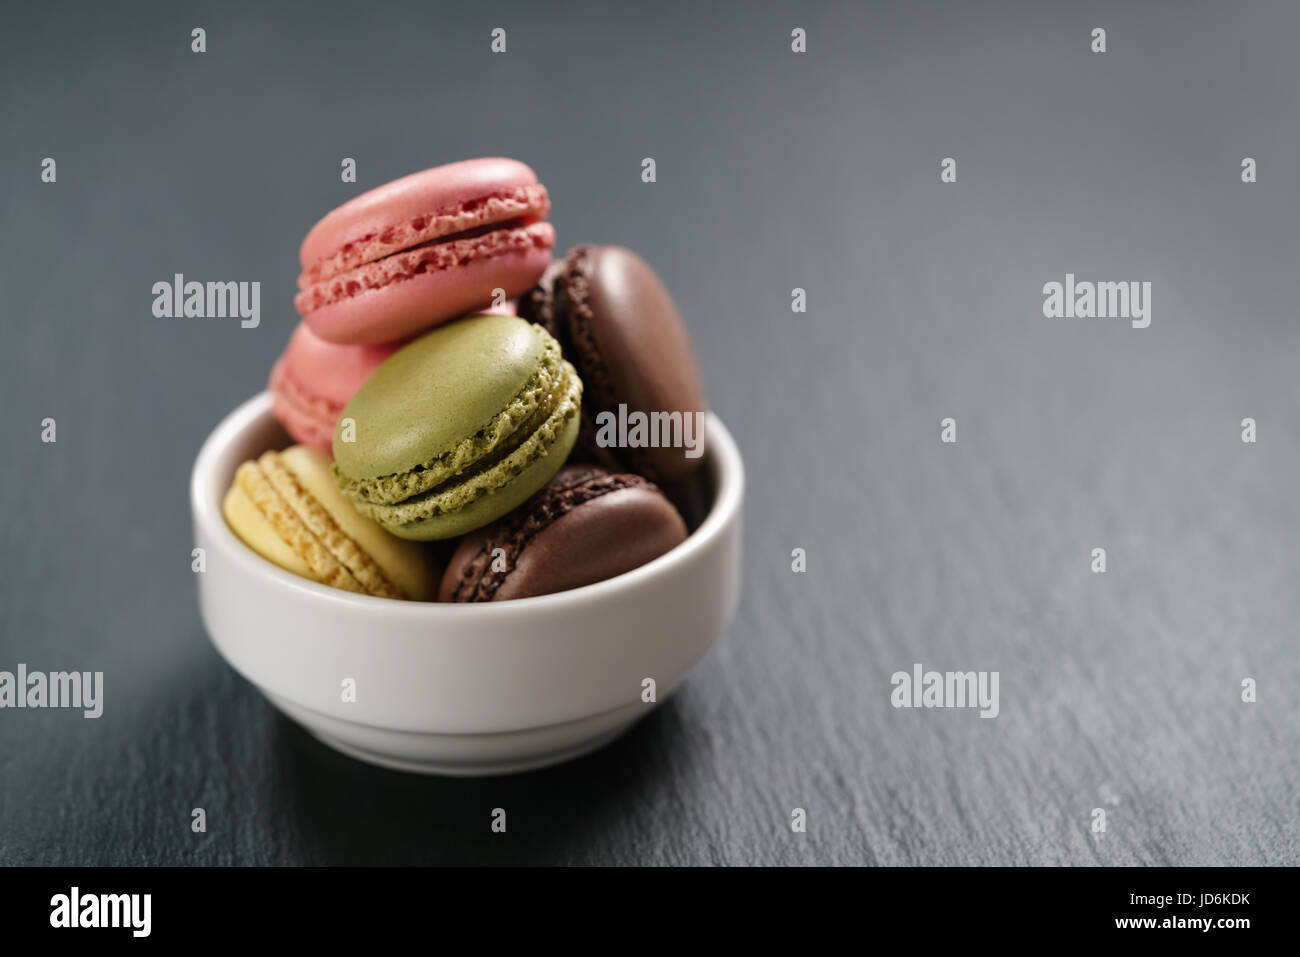 assorted macarons in white bowl on slate background Stock Photo